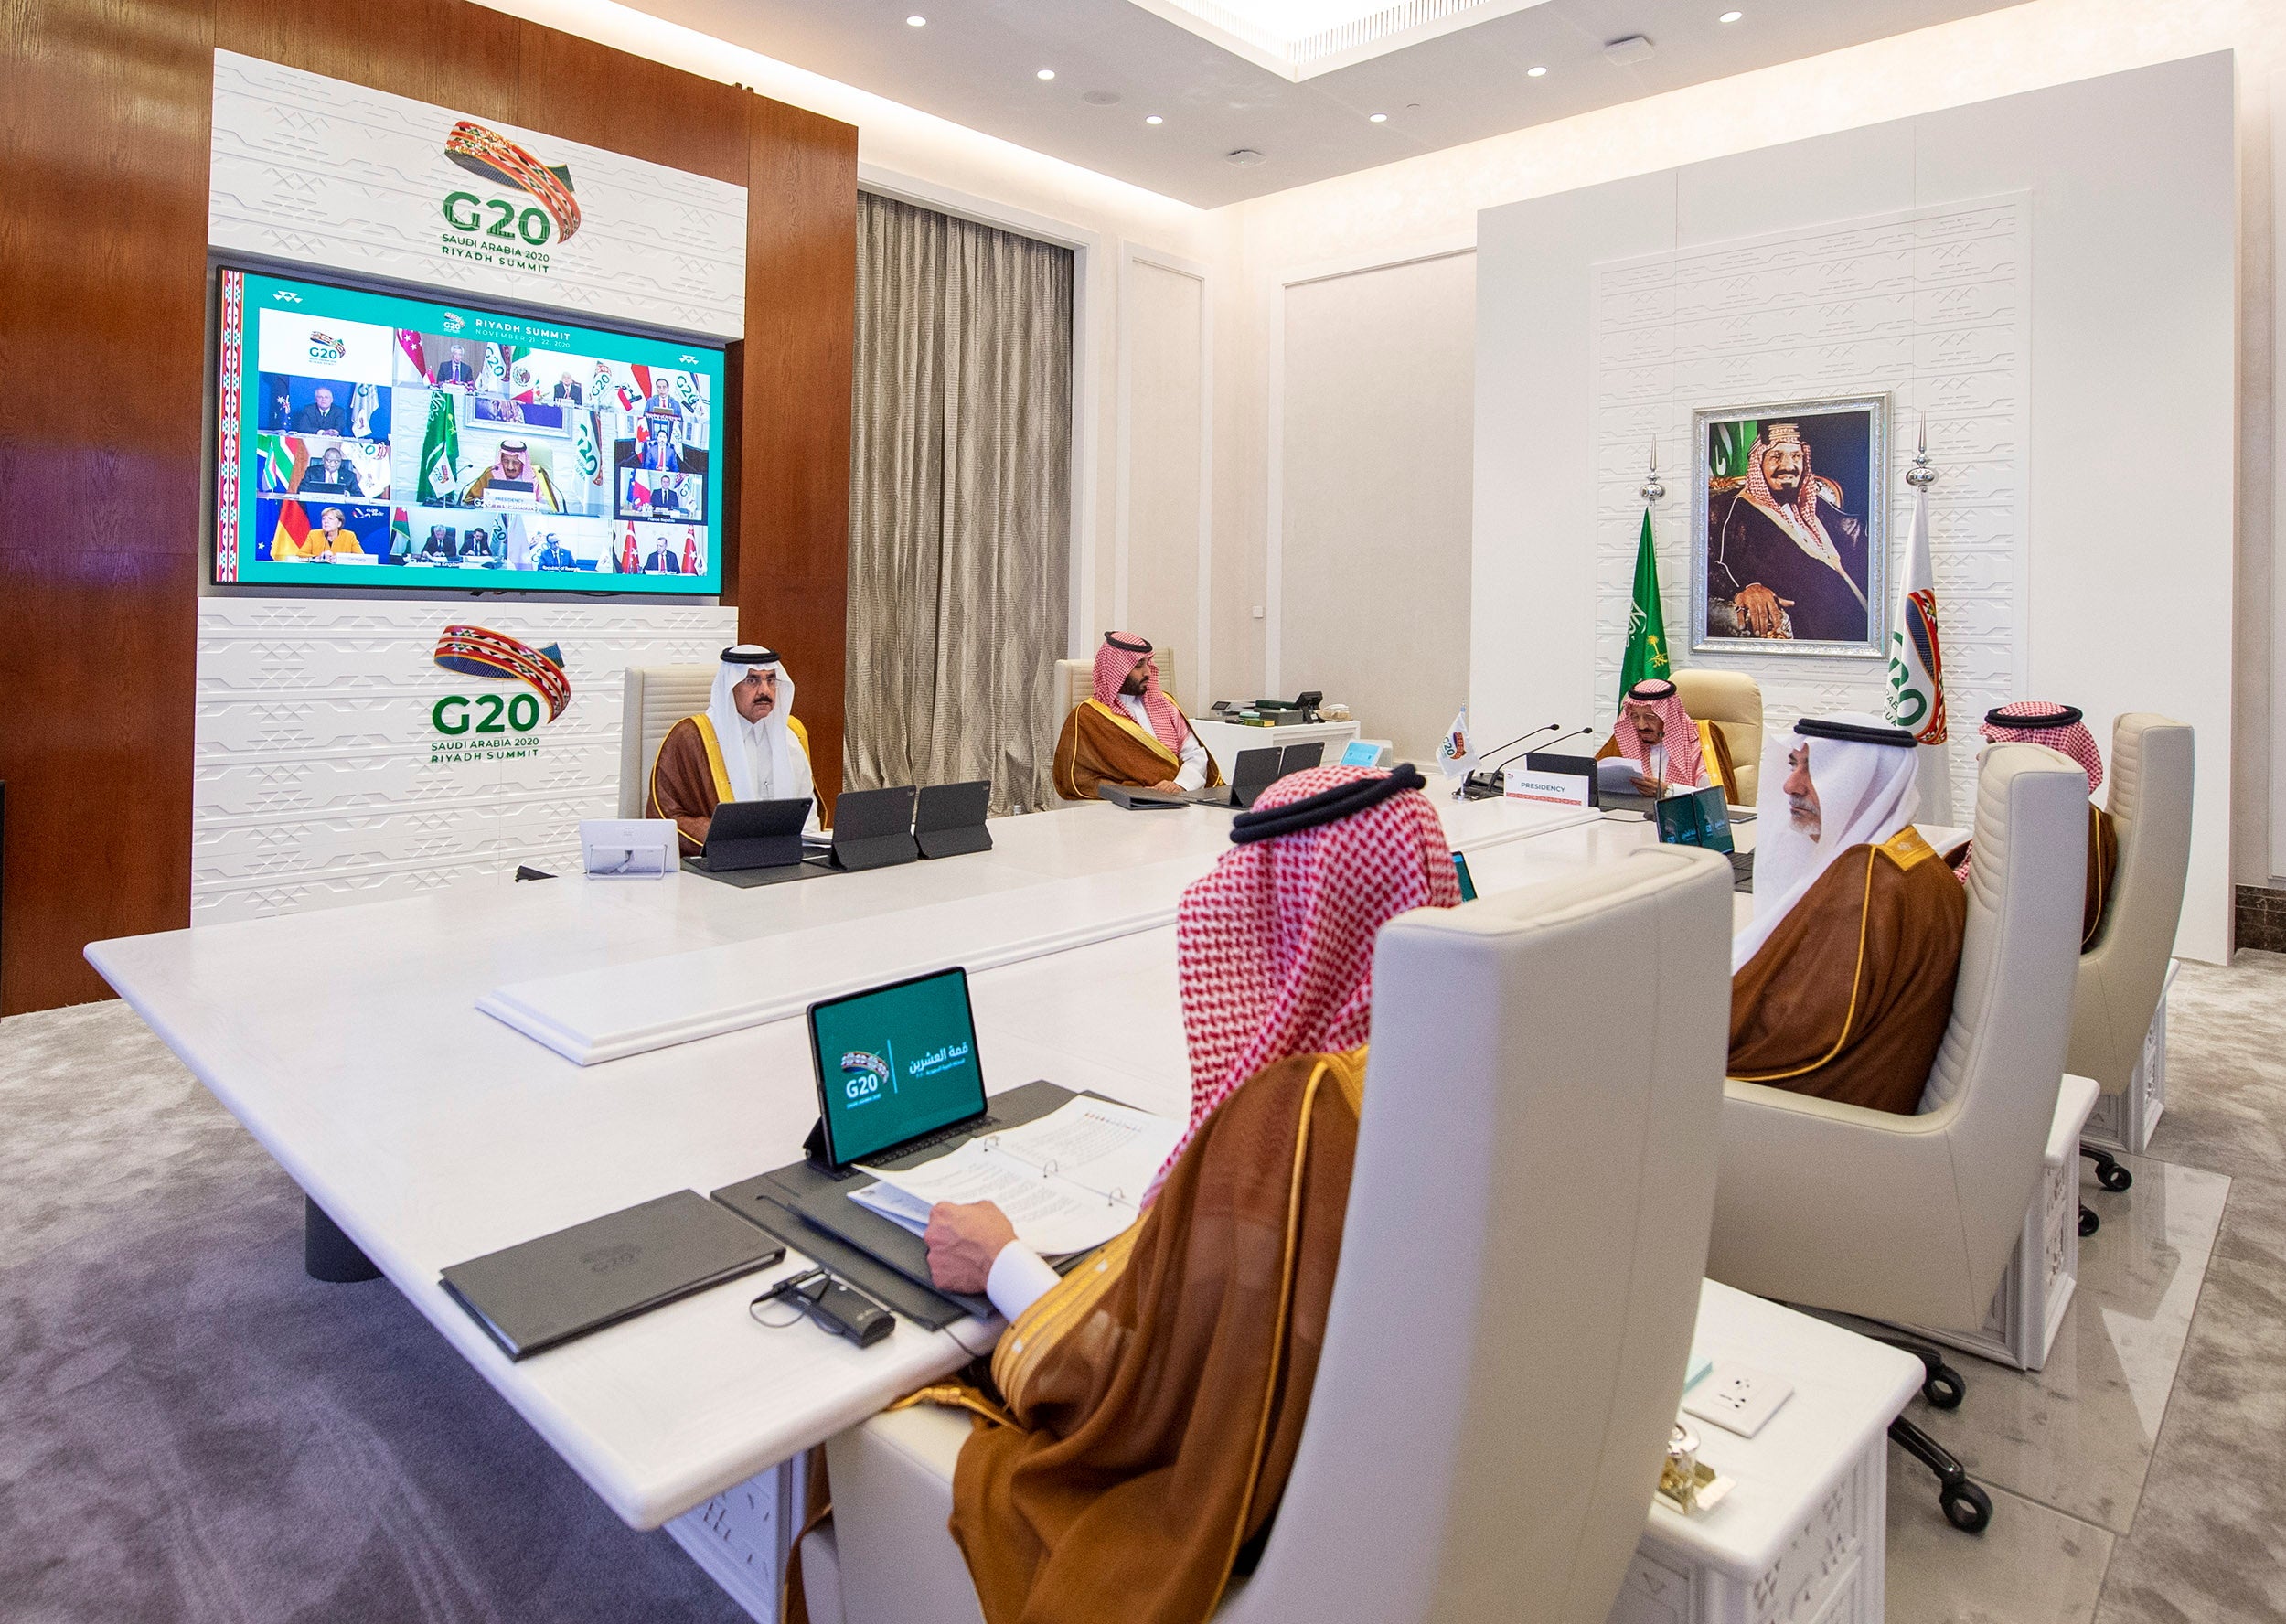 King Salman gives a virtual speech during an opening session of the G20 Summit in Riyadh